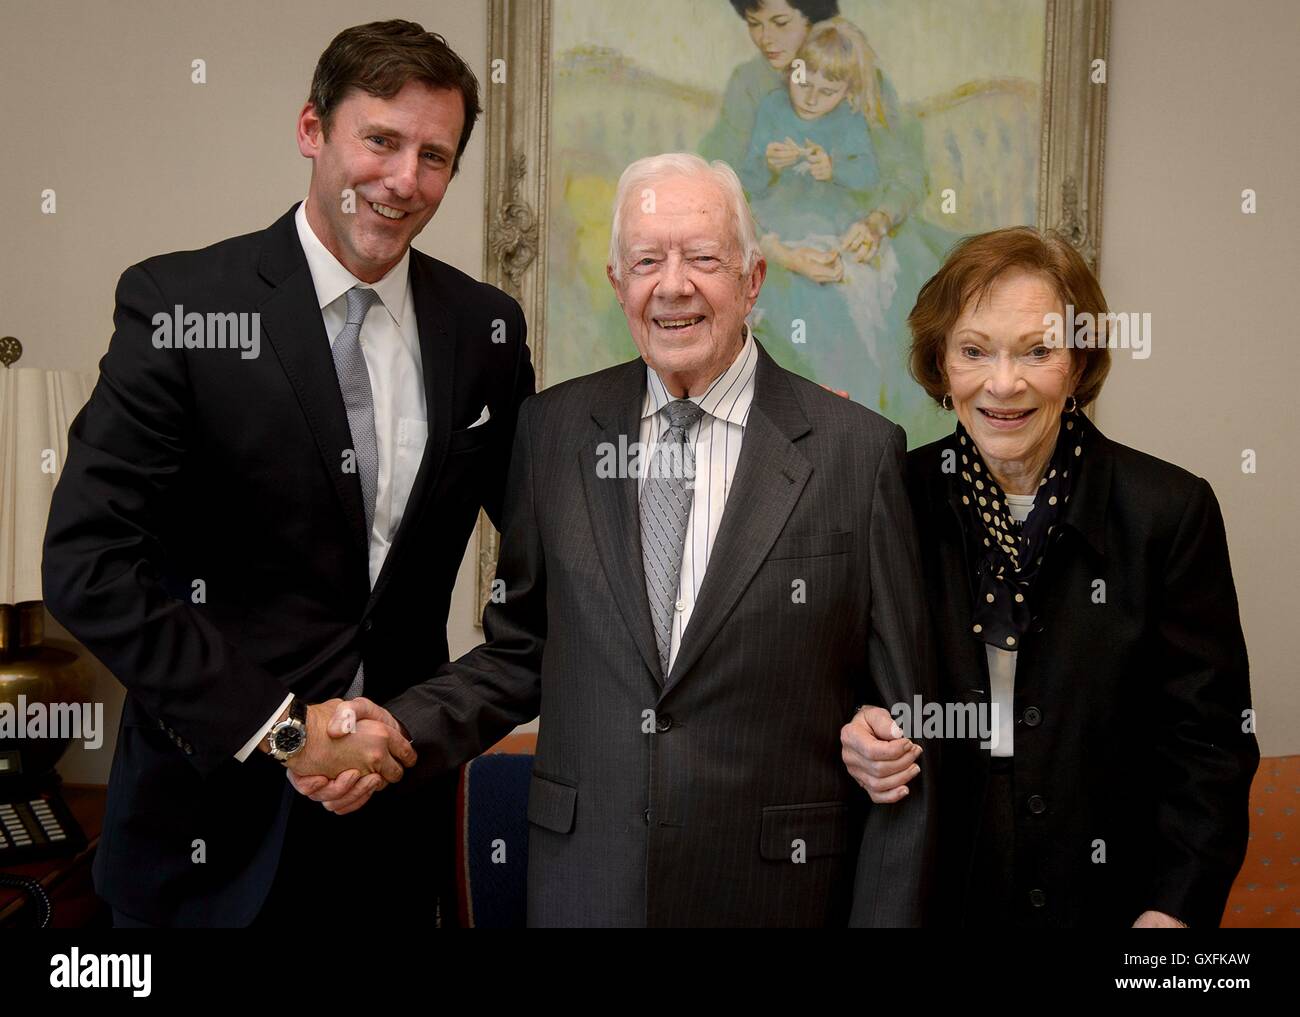 Former U.S. President Jimmy Carter, shown with wife Rosalynn Carter (left) shakes hands with library director Mark Updegrove while accepting the LBJ Foundation award at The Carter Center January 13, 2016 in Atlanta, Georgia. The LBJ Liberty and Justice for All Award recognizes leadership in public service. Stock Photo